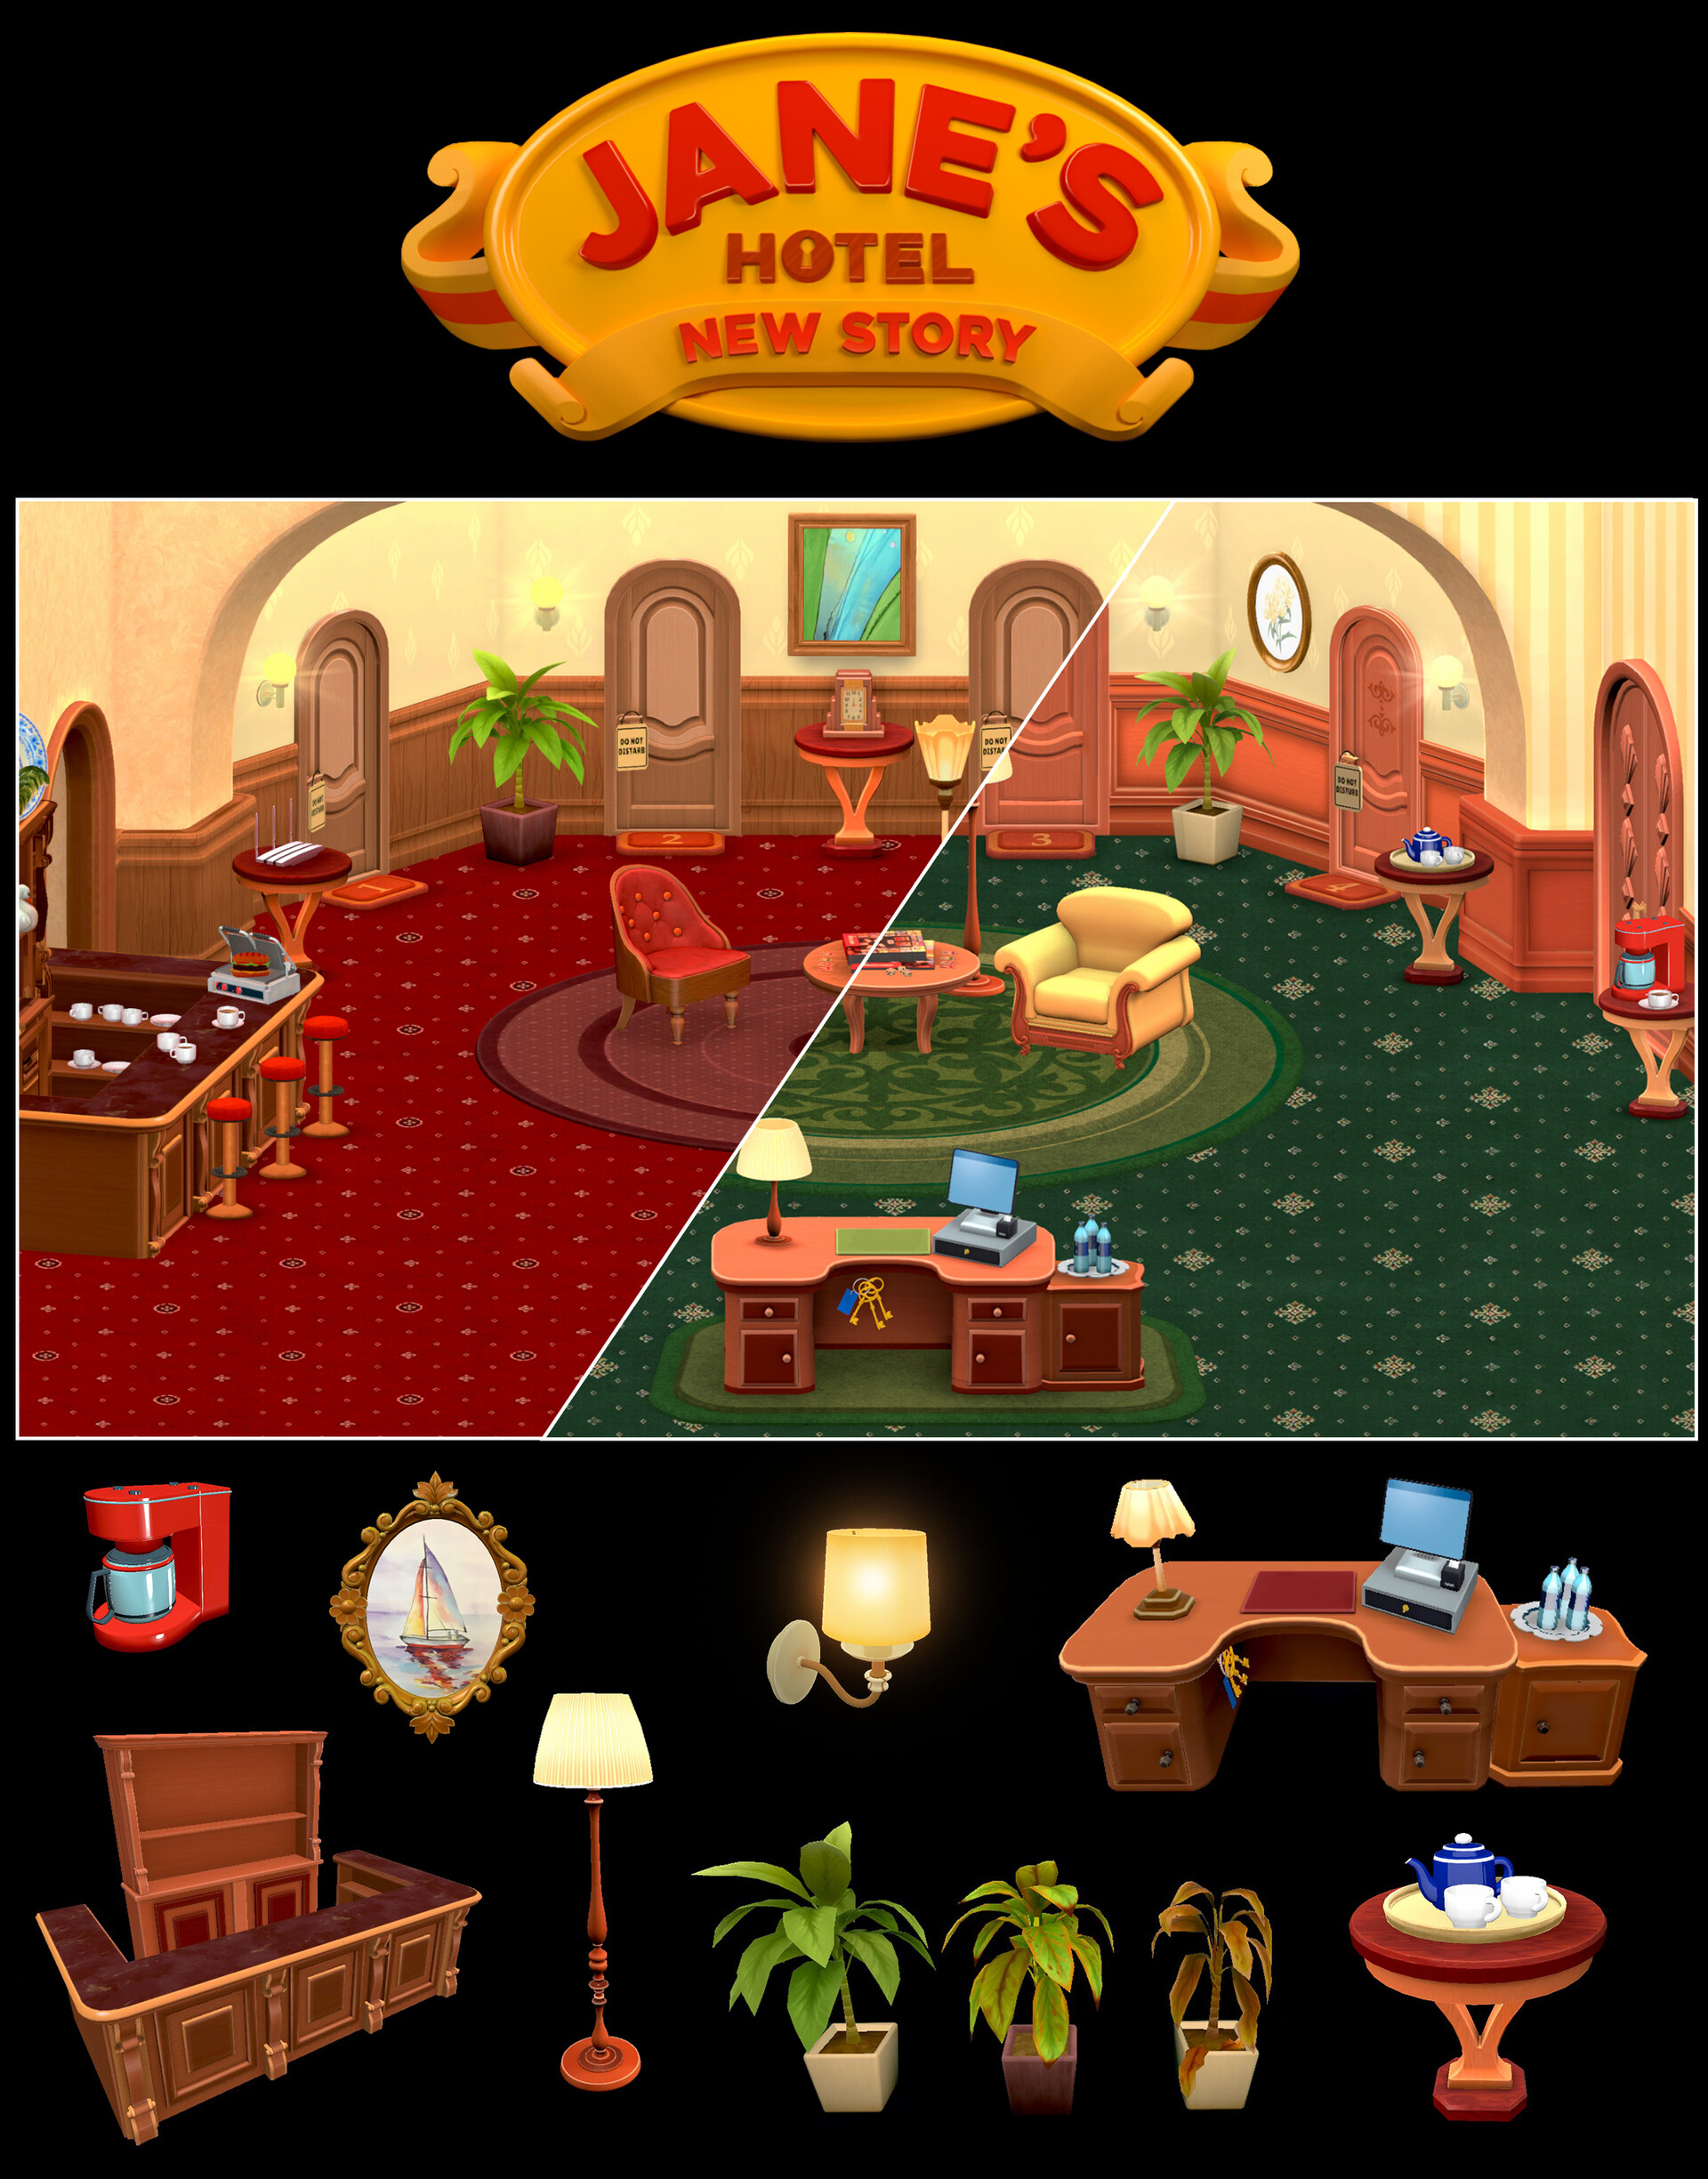 ArtStation - ''Jane's hotel. New story'' Game project